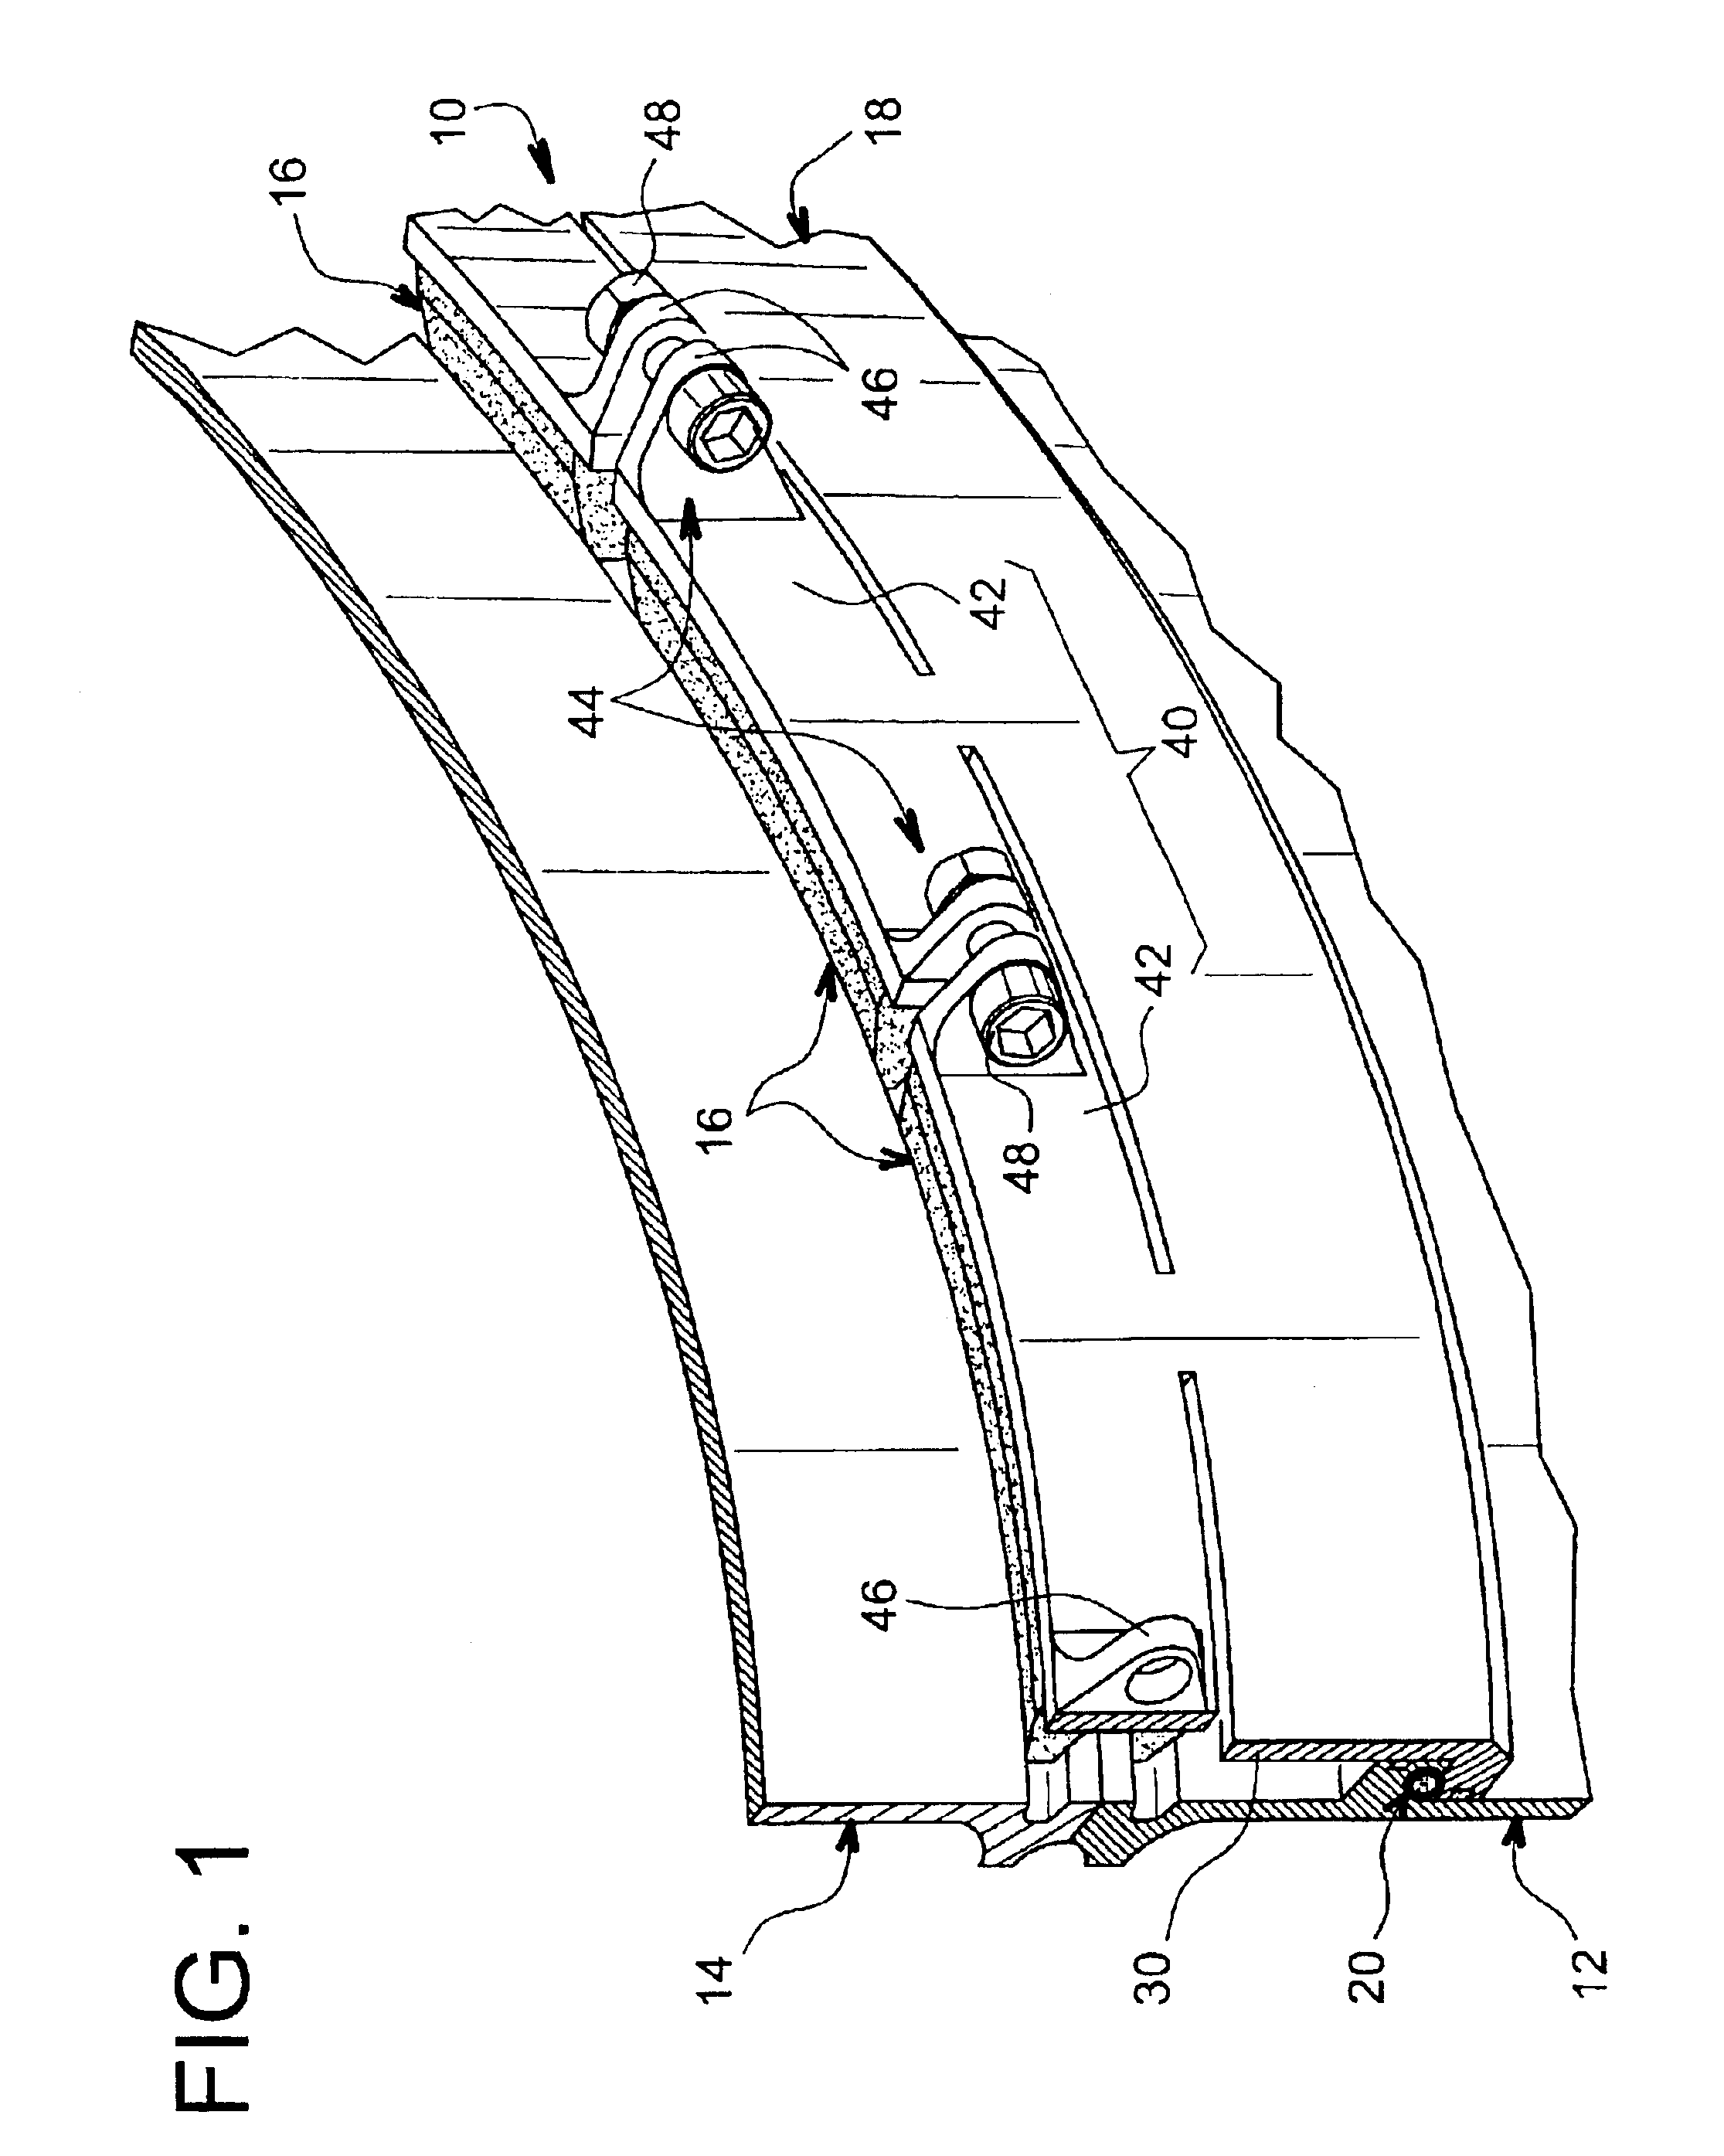 Moving part device for the temporary connection and pyrotechnic separation of two elements